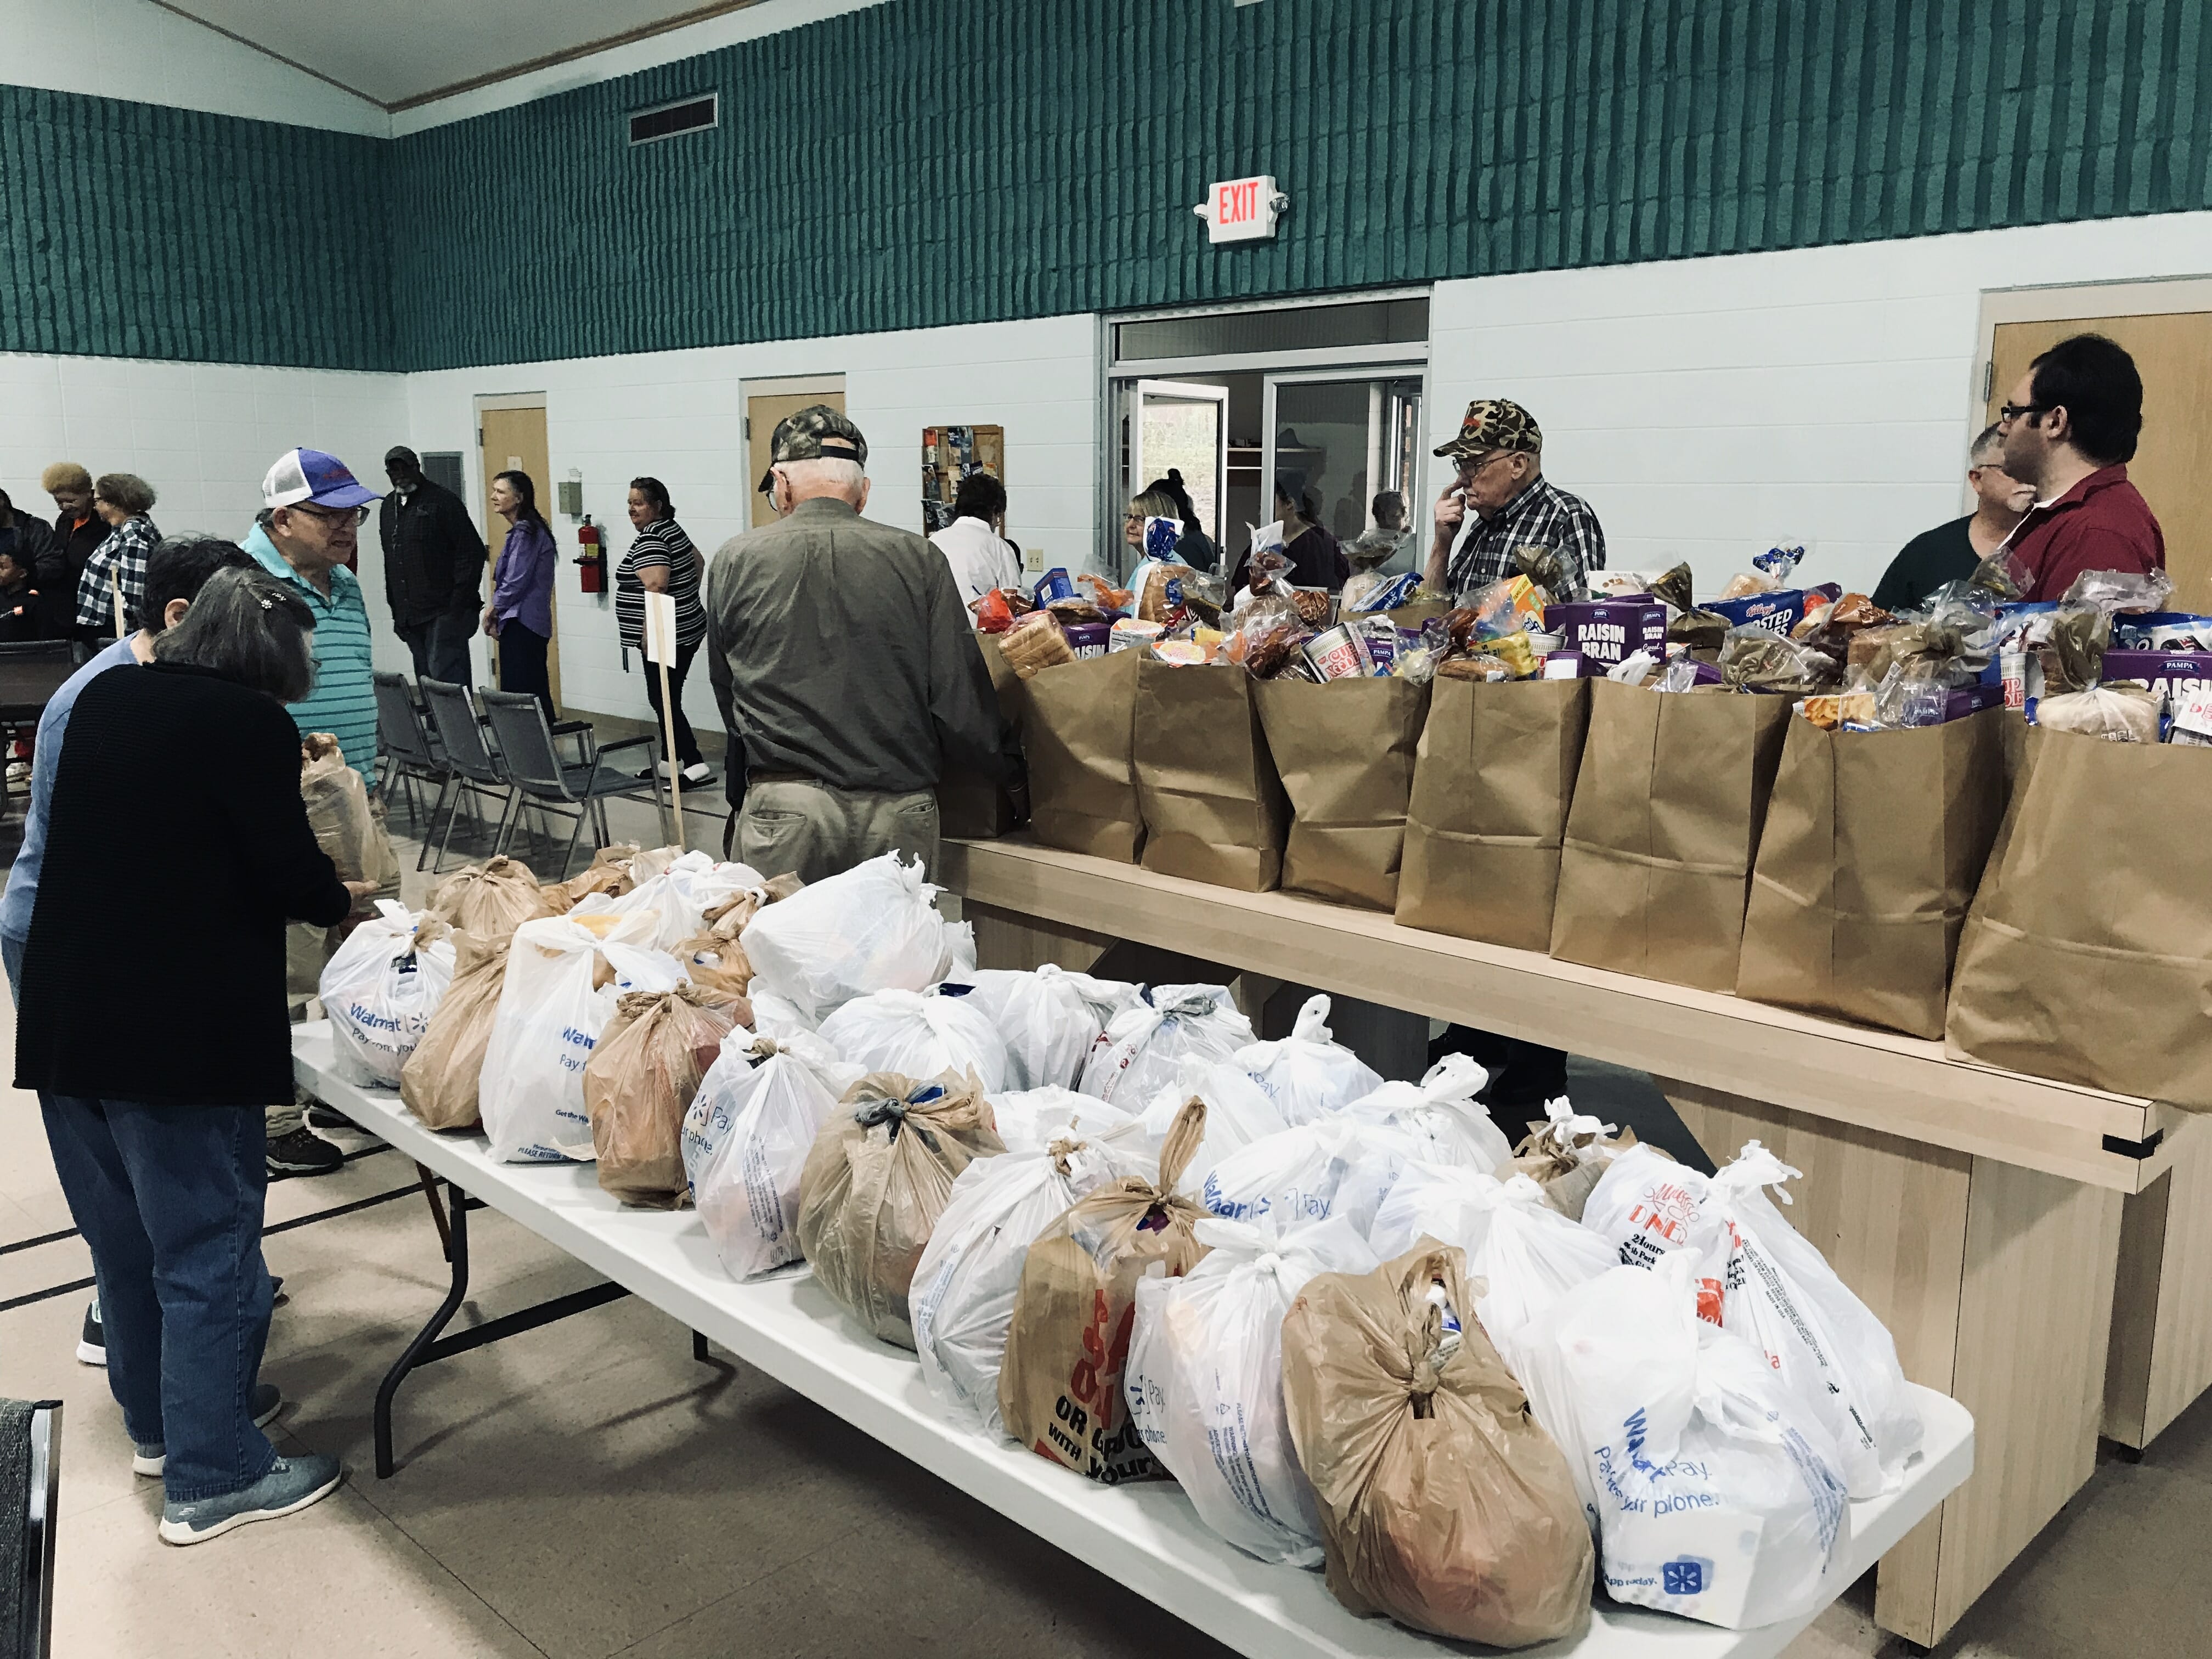 74 bags of groceries were distributed that day